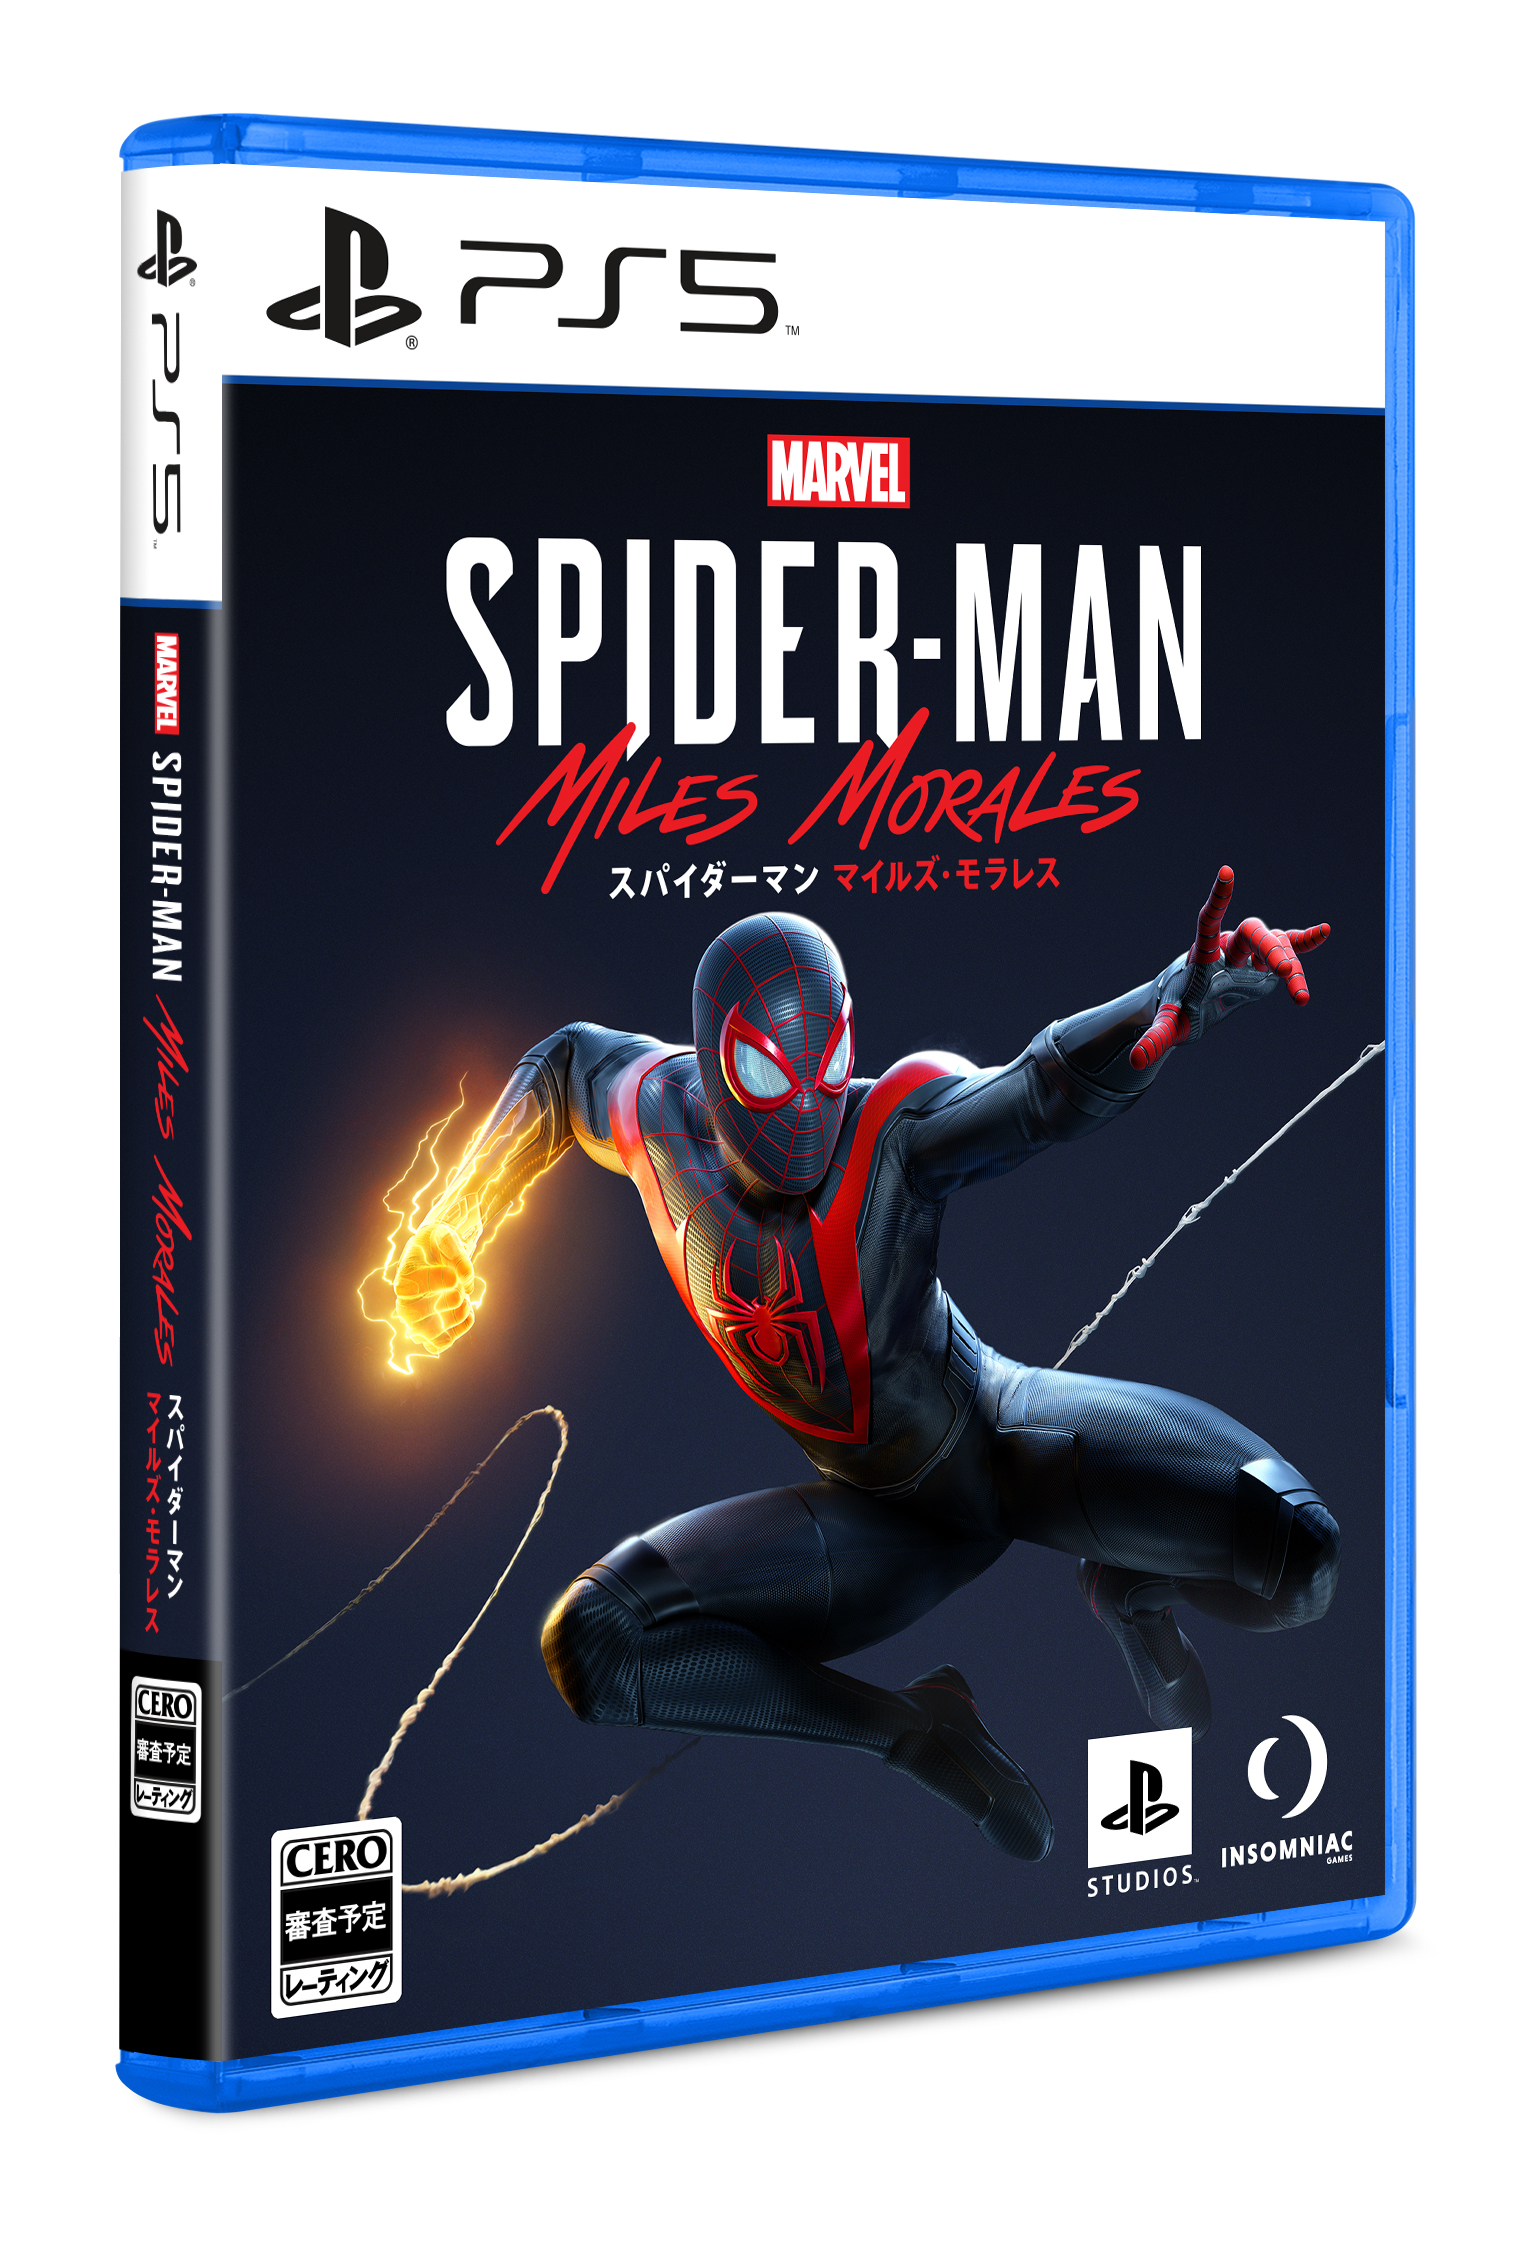 『Marvel's Spider-Man: Miles Morales』パッケージ (C)2020 MARVEL (C)Sony Interactive Entertainment LLC. Created and developed by Insomniac Games, Inc.